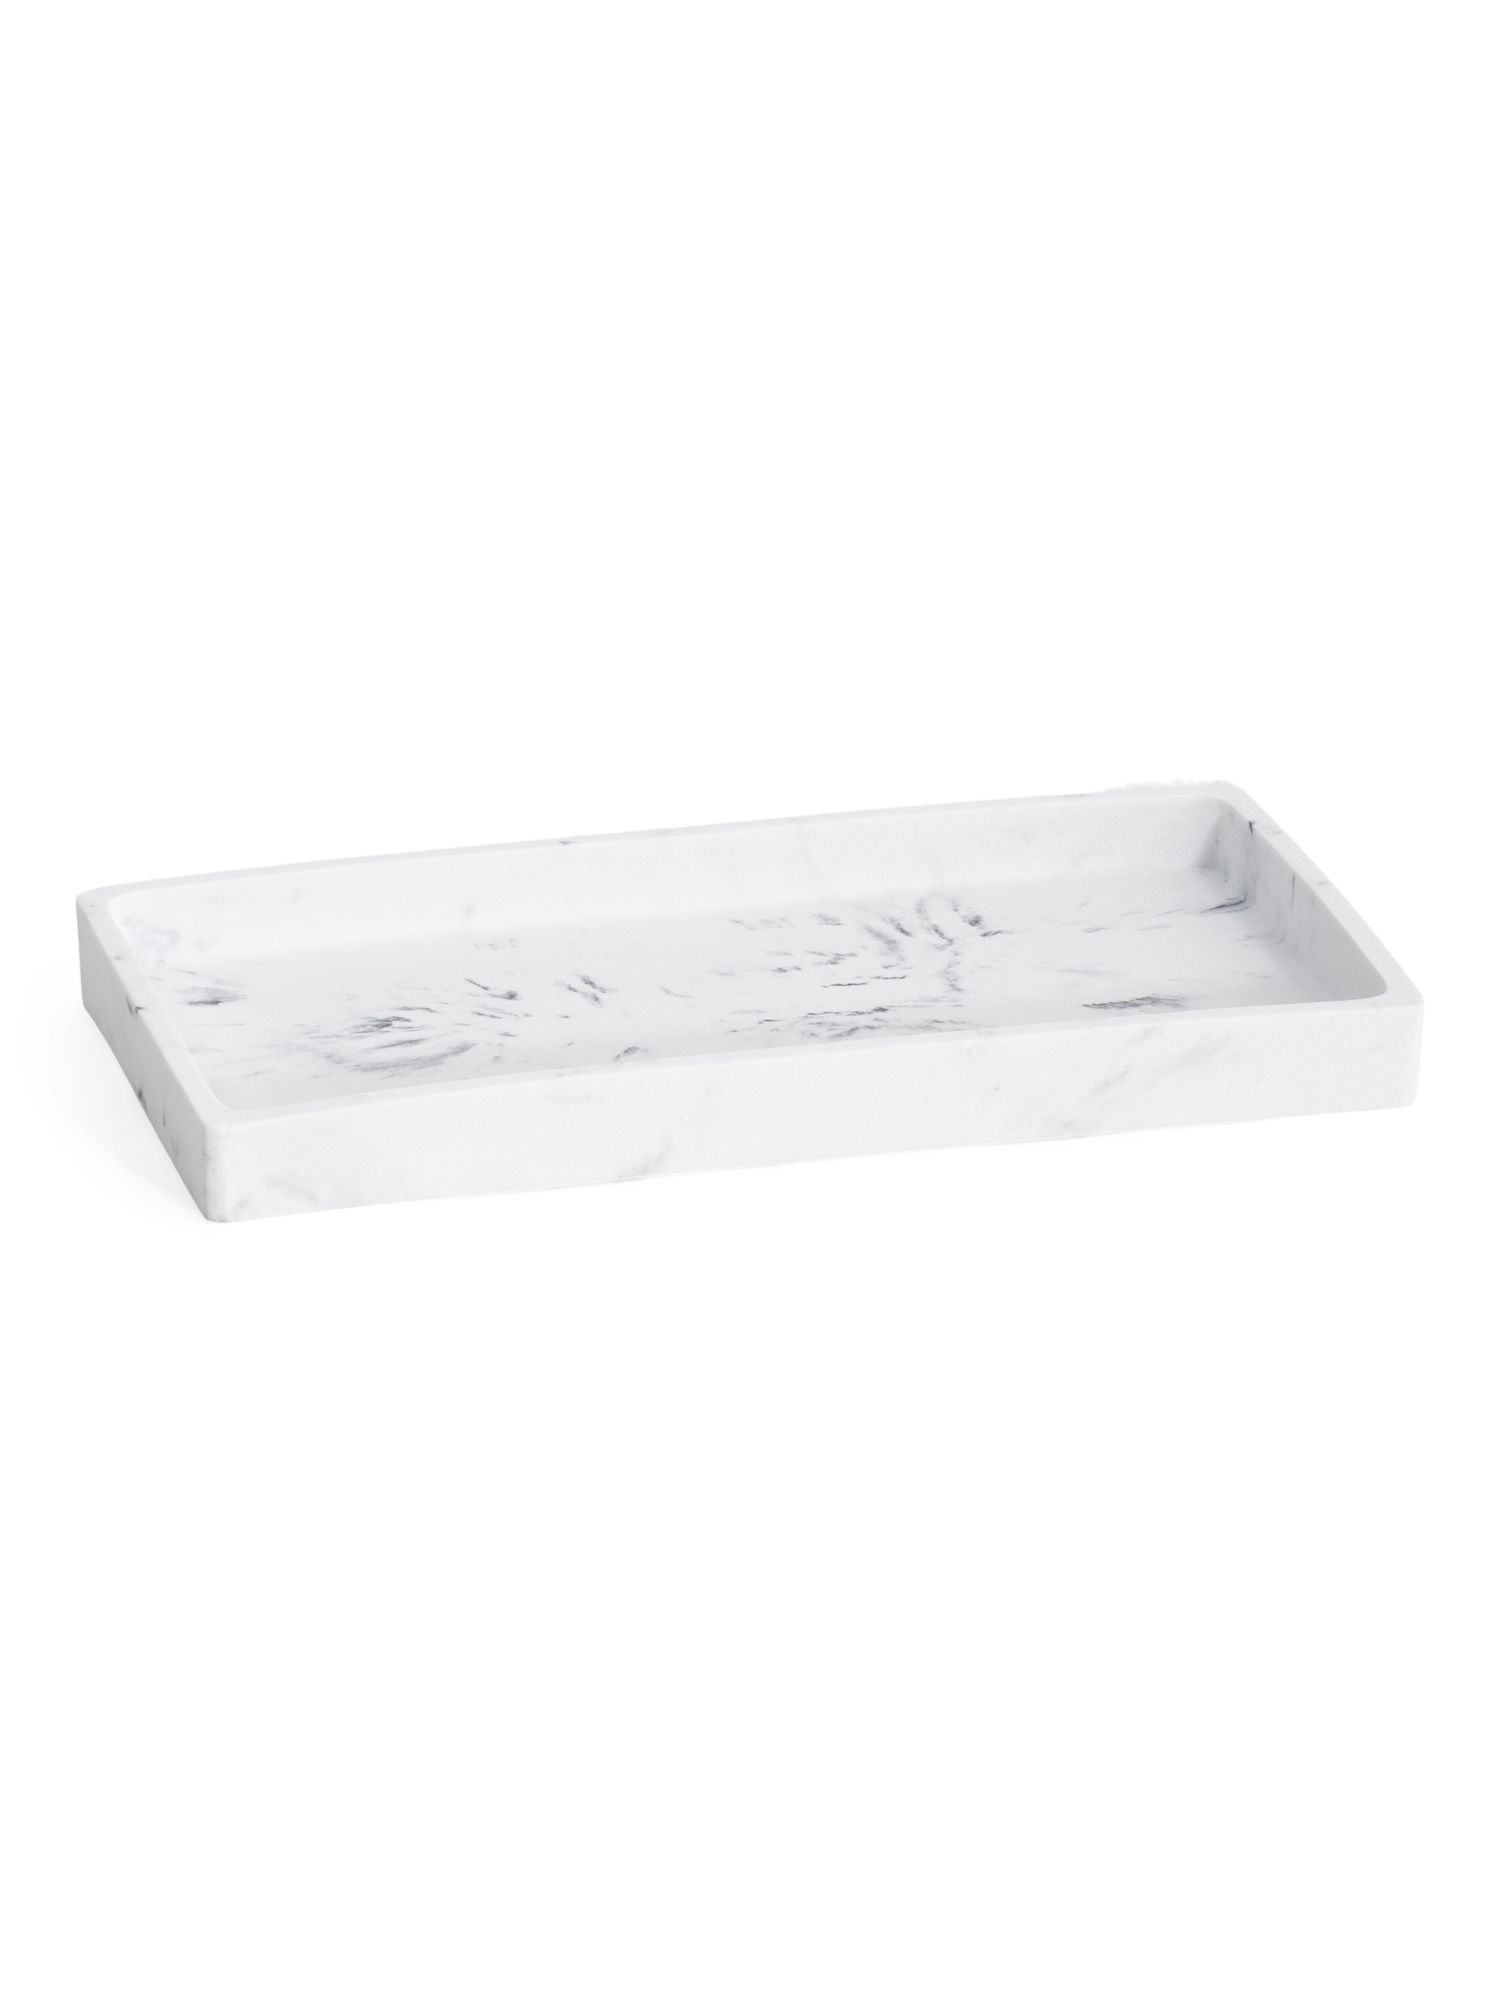 Resin Organizer Tray With Marble Look | Marshalls